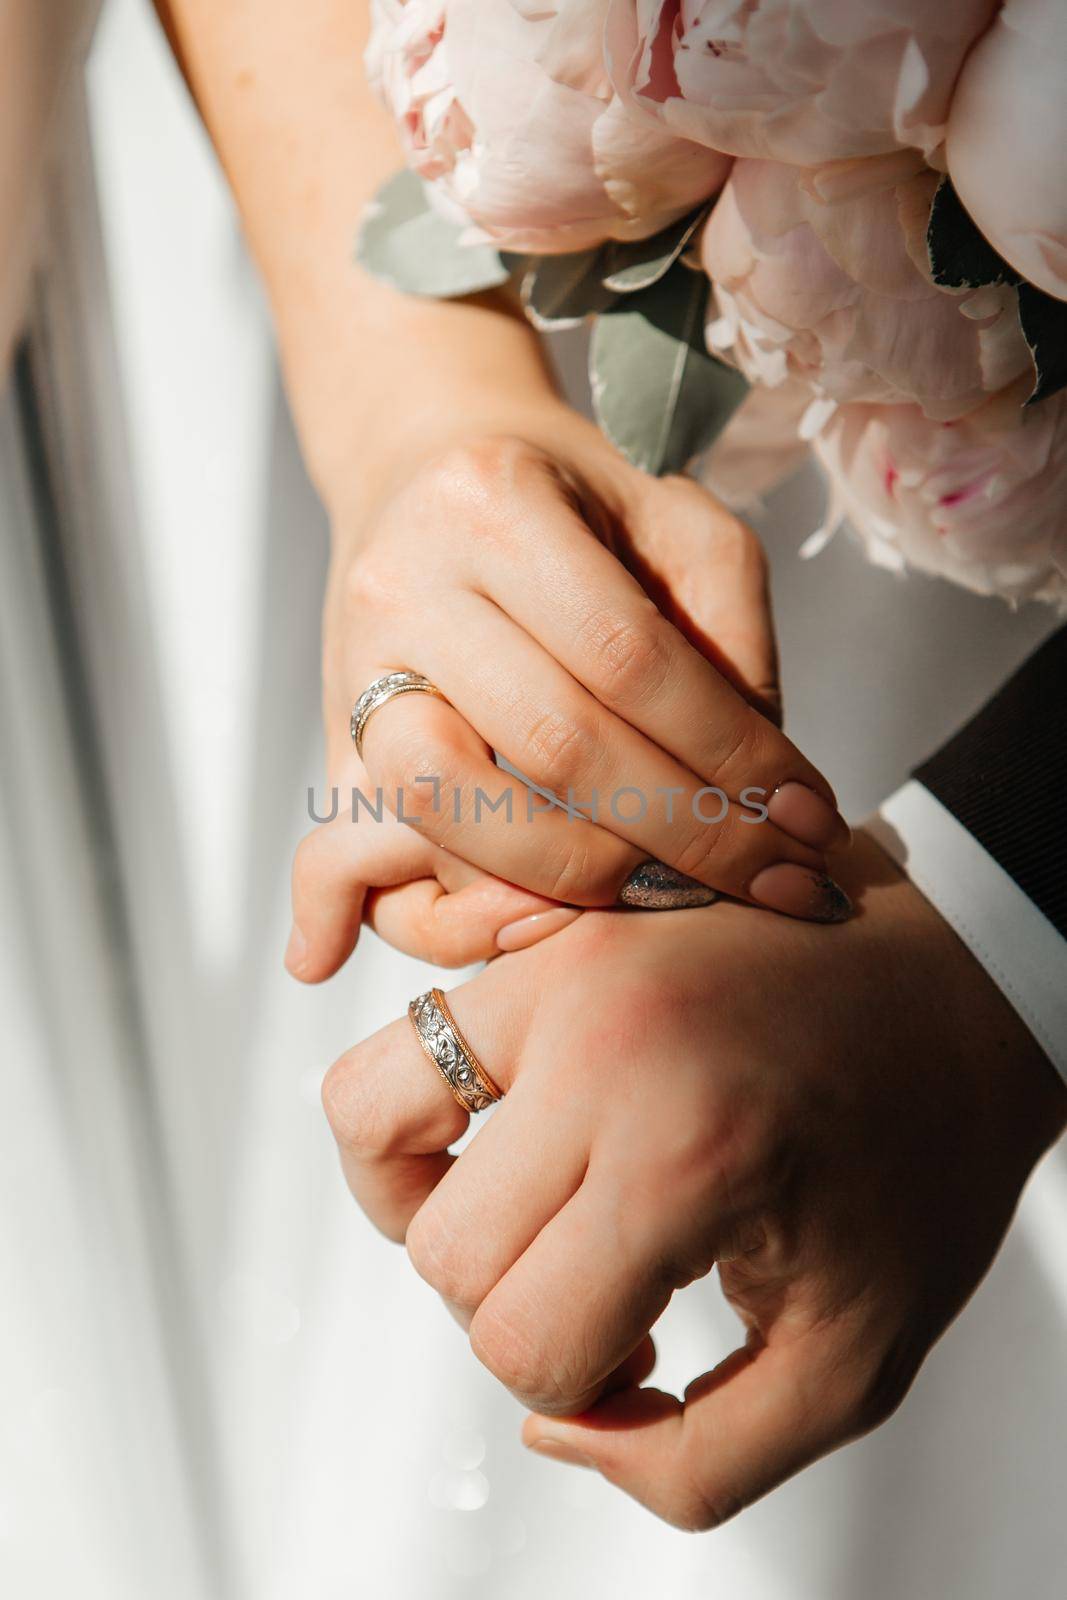 The hands of the newlyweds, which wearing wedding ring by deandy